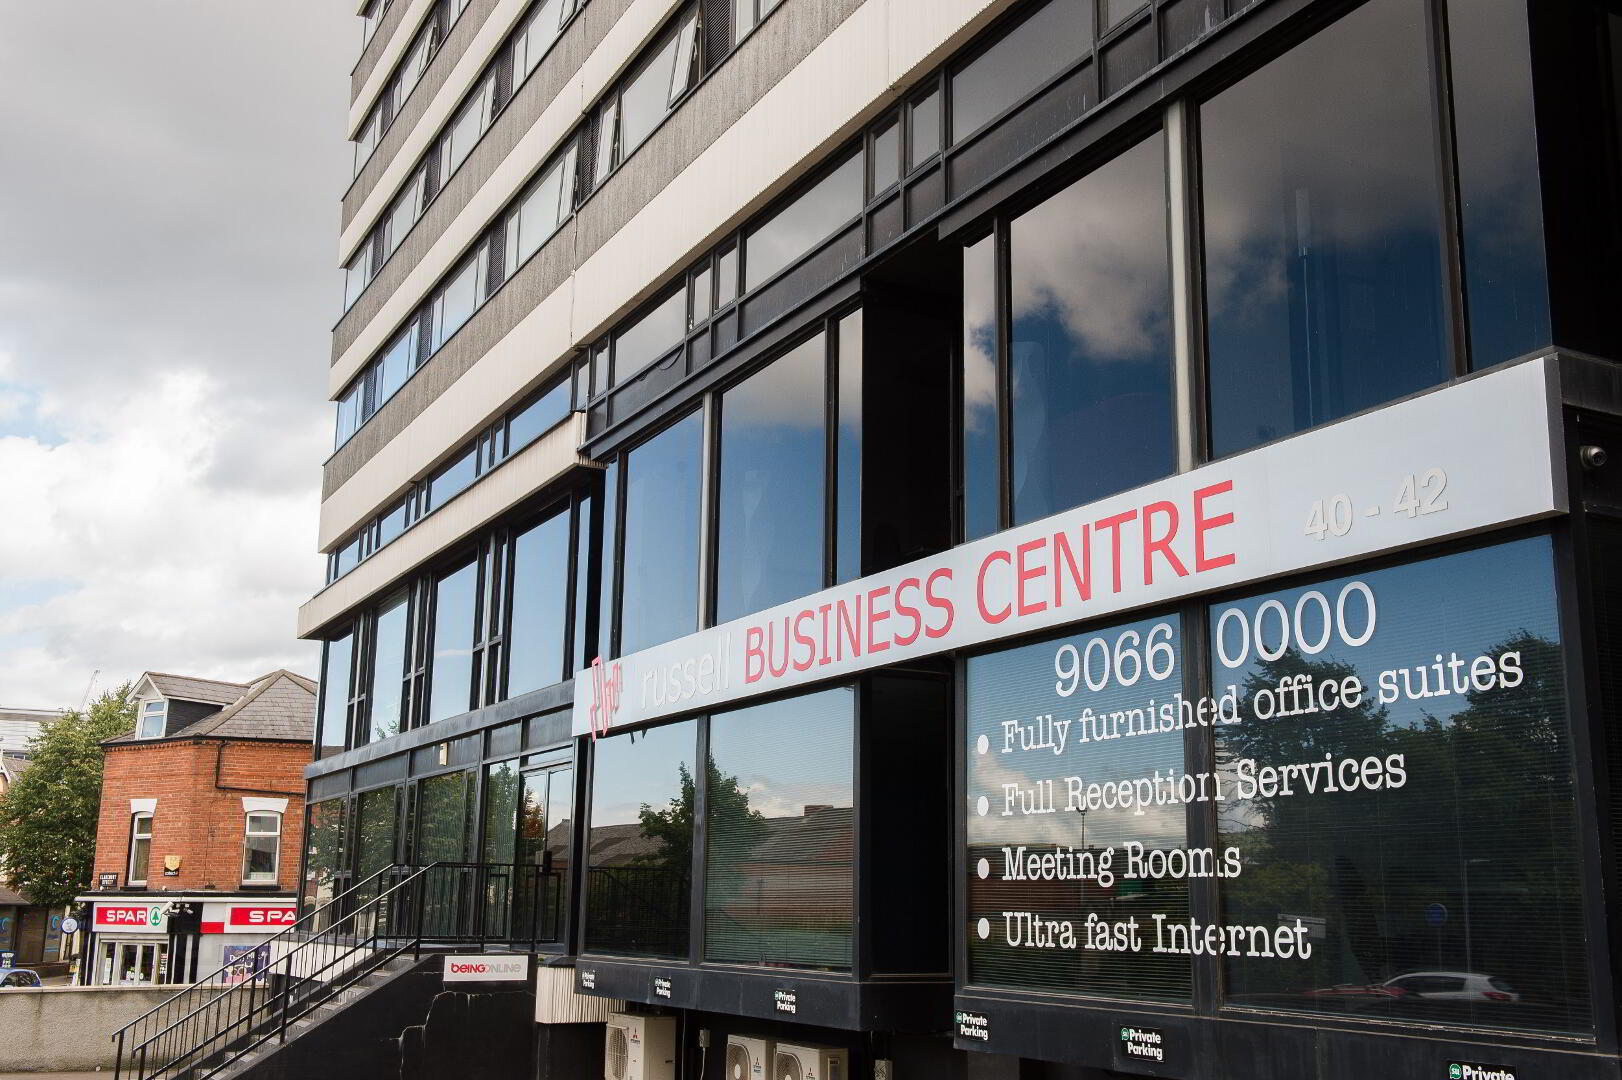 Russell Business Centre, 40-42 Lisburn Road